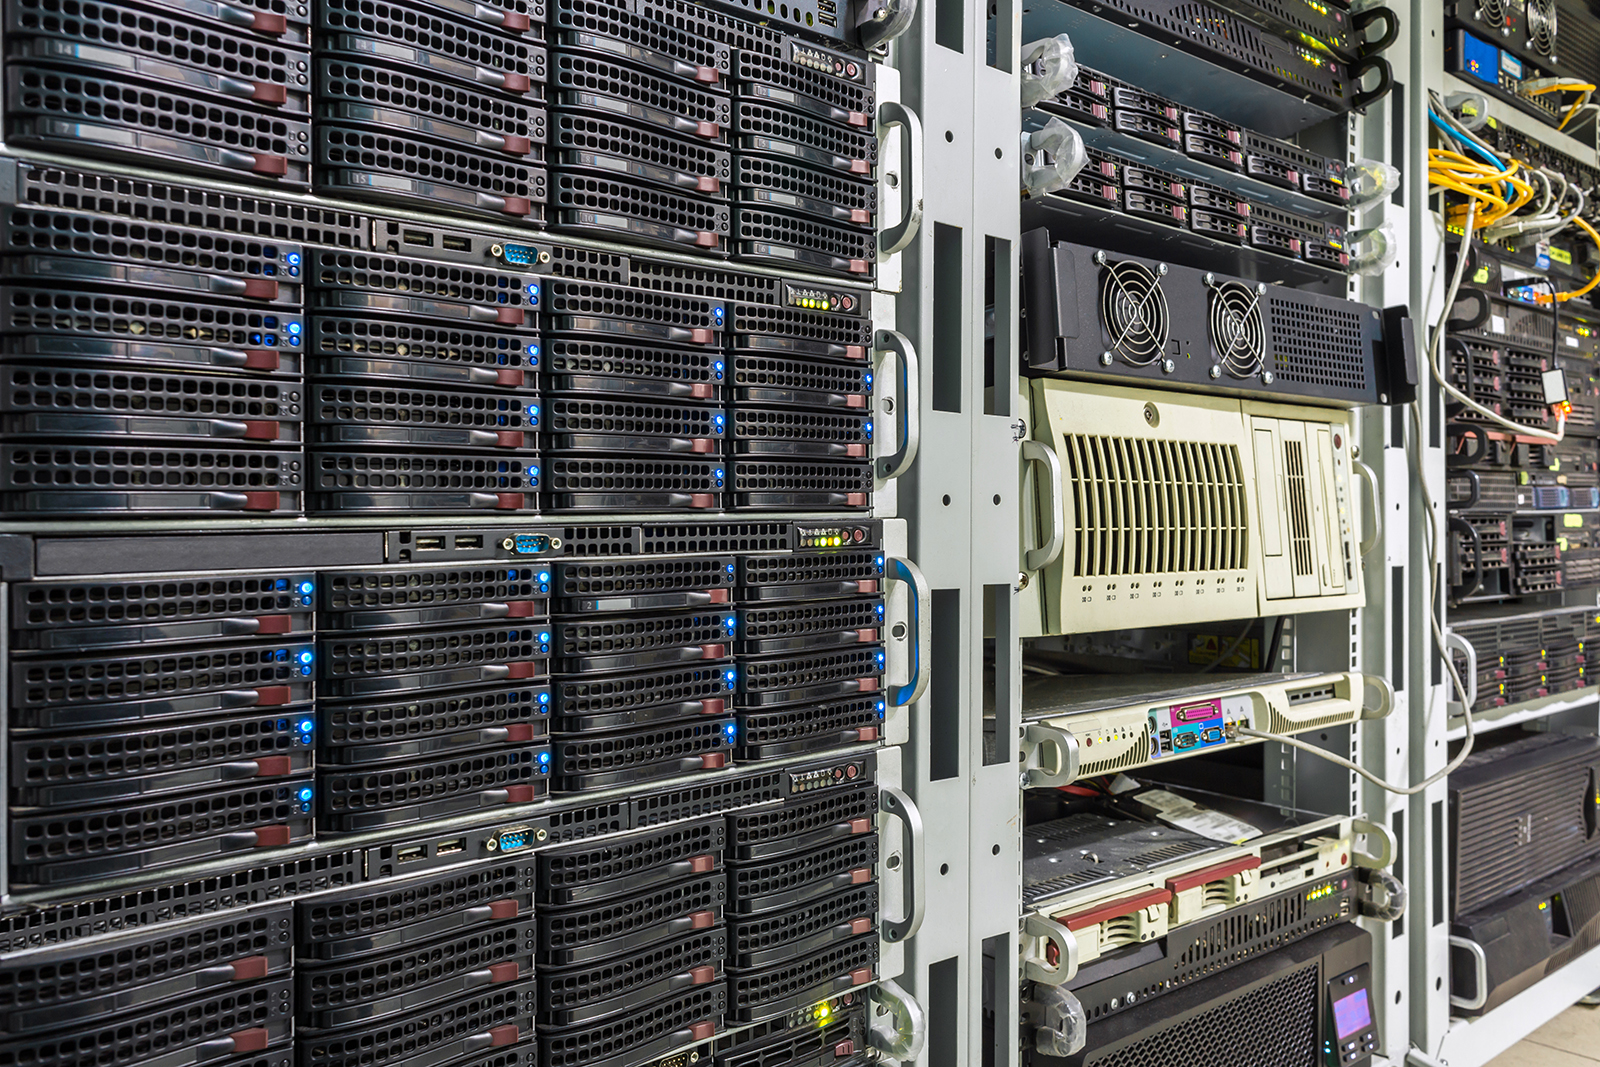 A photo shows racks of servers in a data center facility.
